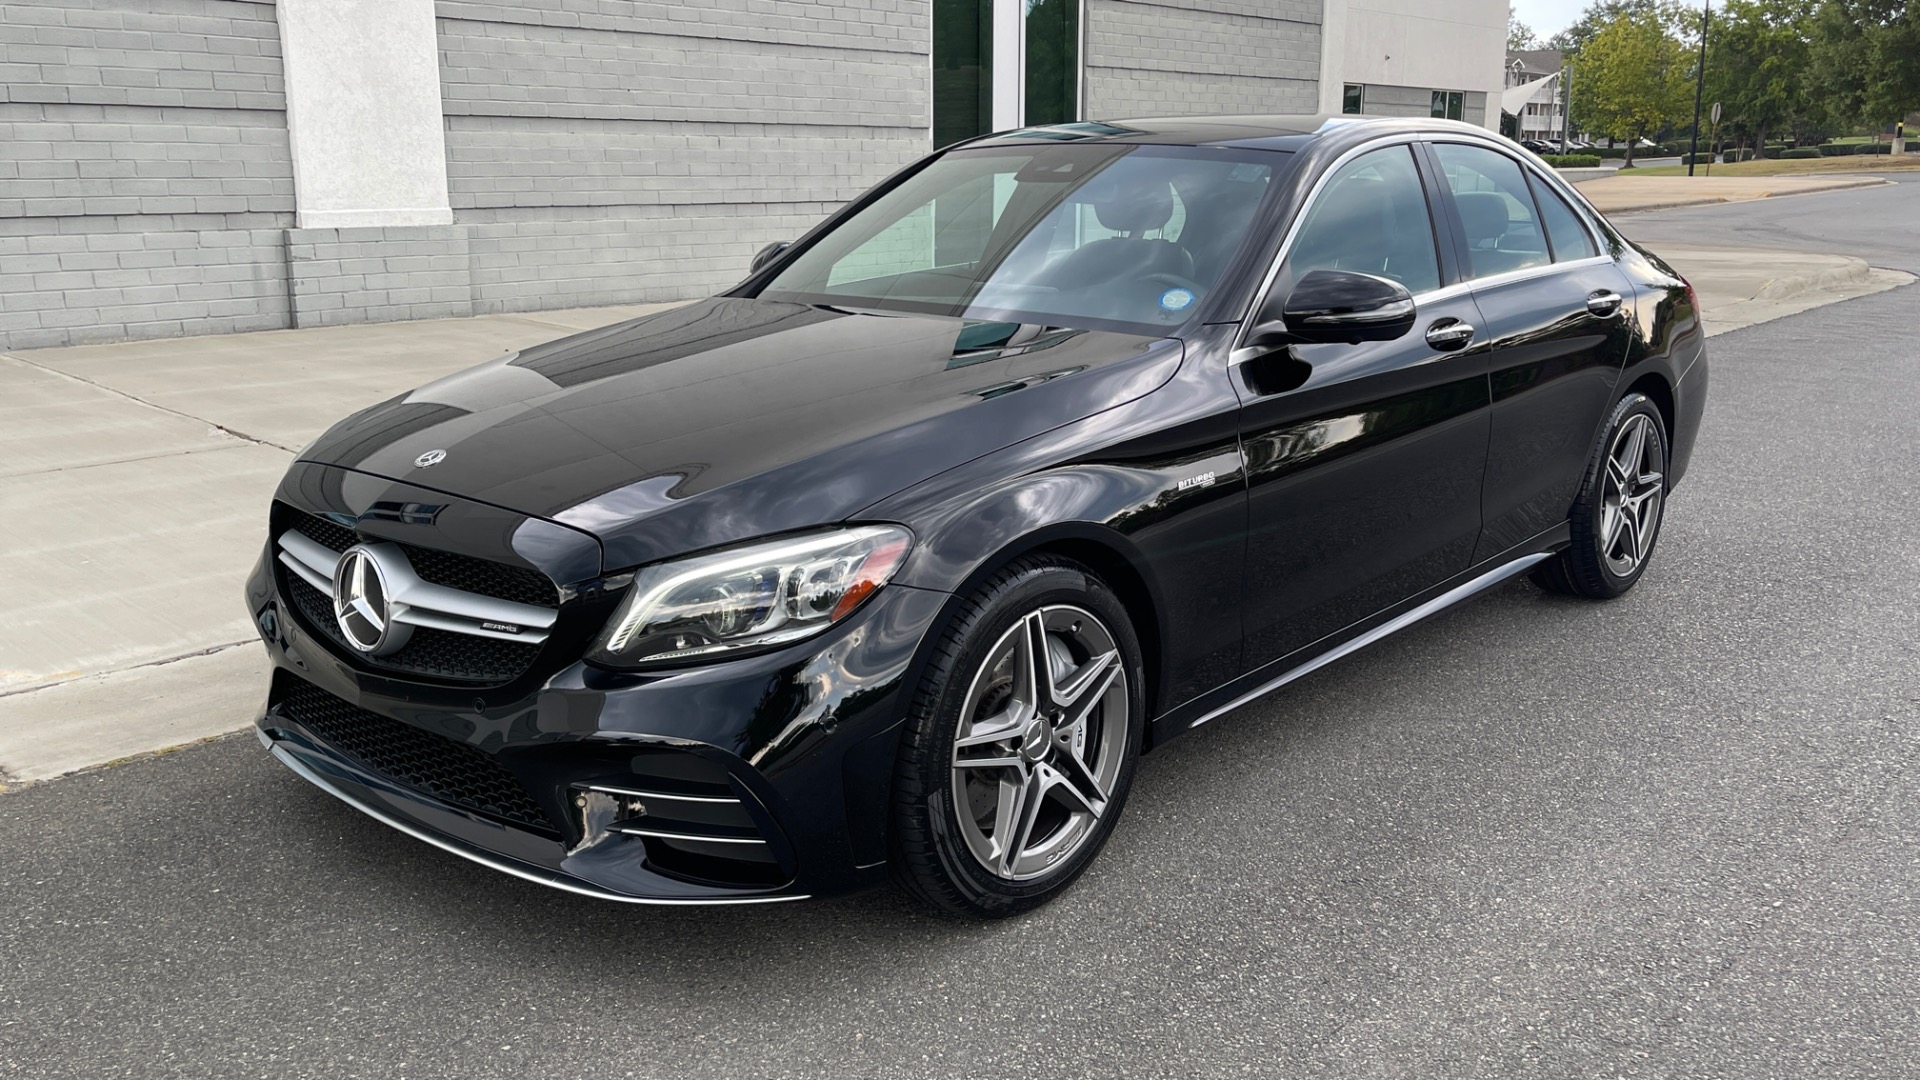 Used 2020 Mercedes-Benz C-CLASS AMG C43 4MATIC / PARK ASST / PANO-ROOF / LIGHTING / REARVIEW for sale $60,595 at Formula Imports in Charlotte NC 28227 3